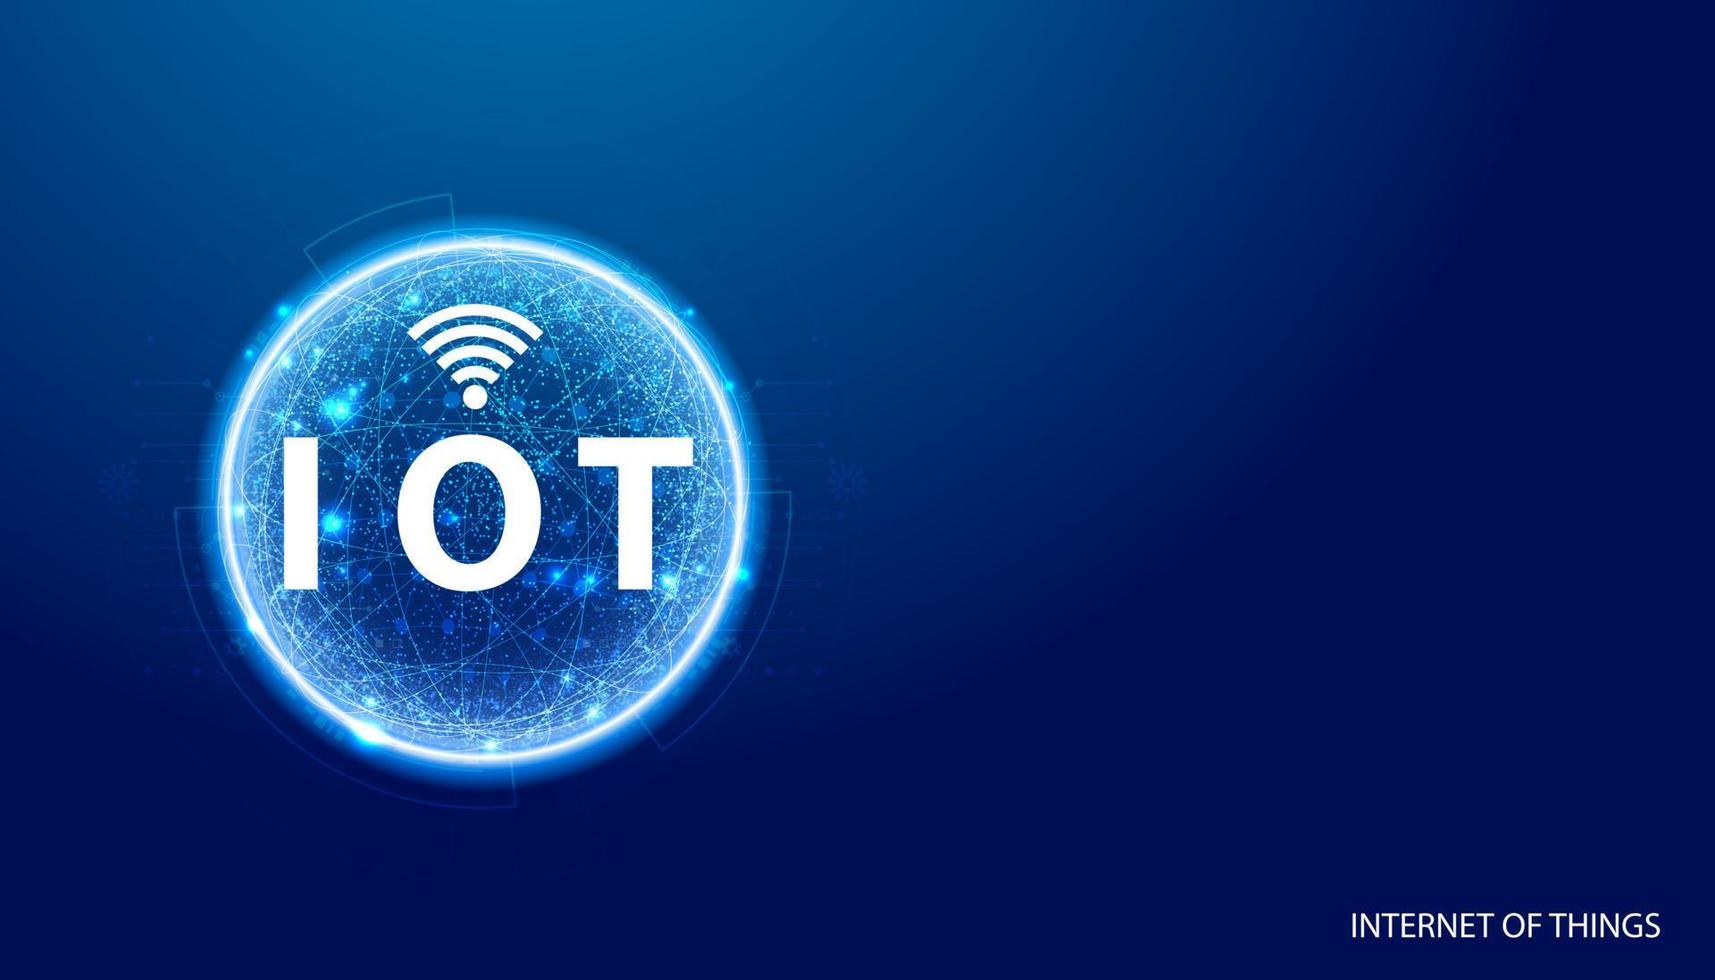 Abstract IoT Internet of Things Blue background image, circle, digital, network concept, connected to the Internet or M2M, Machine to Machine, Industrial IoT, Commercial IoT. vector